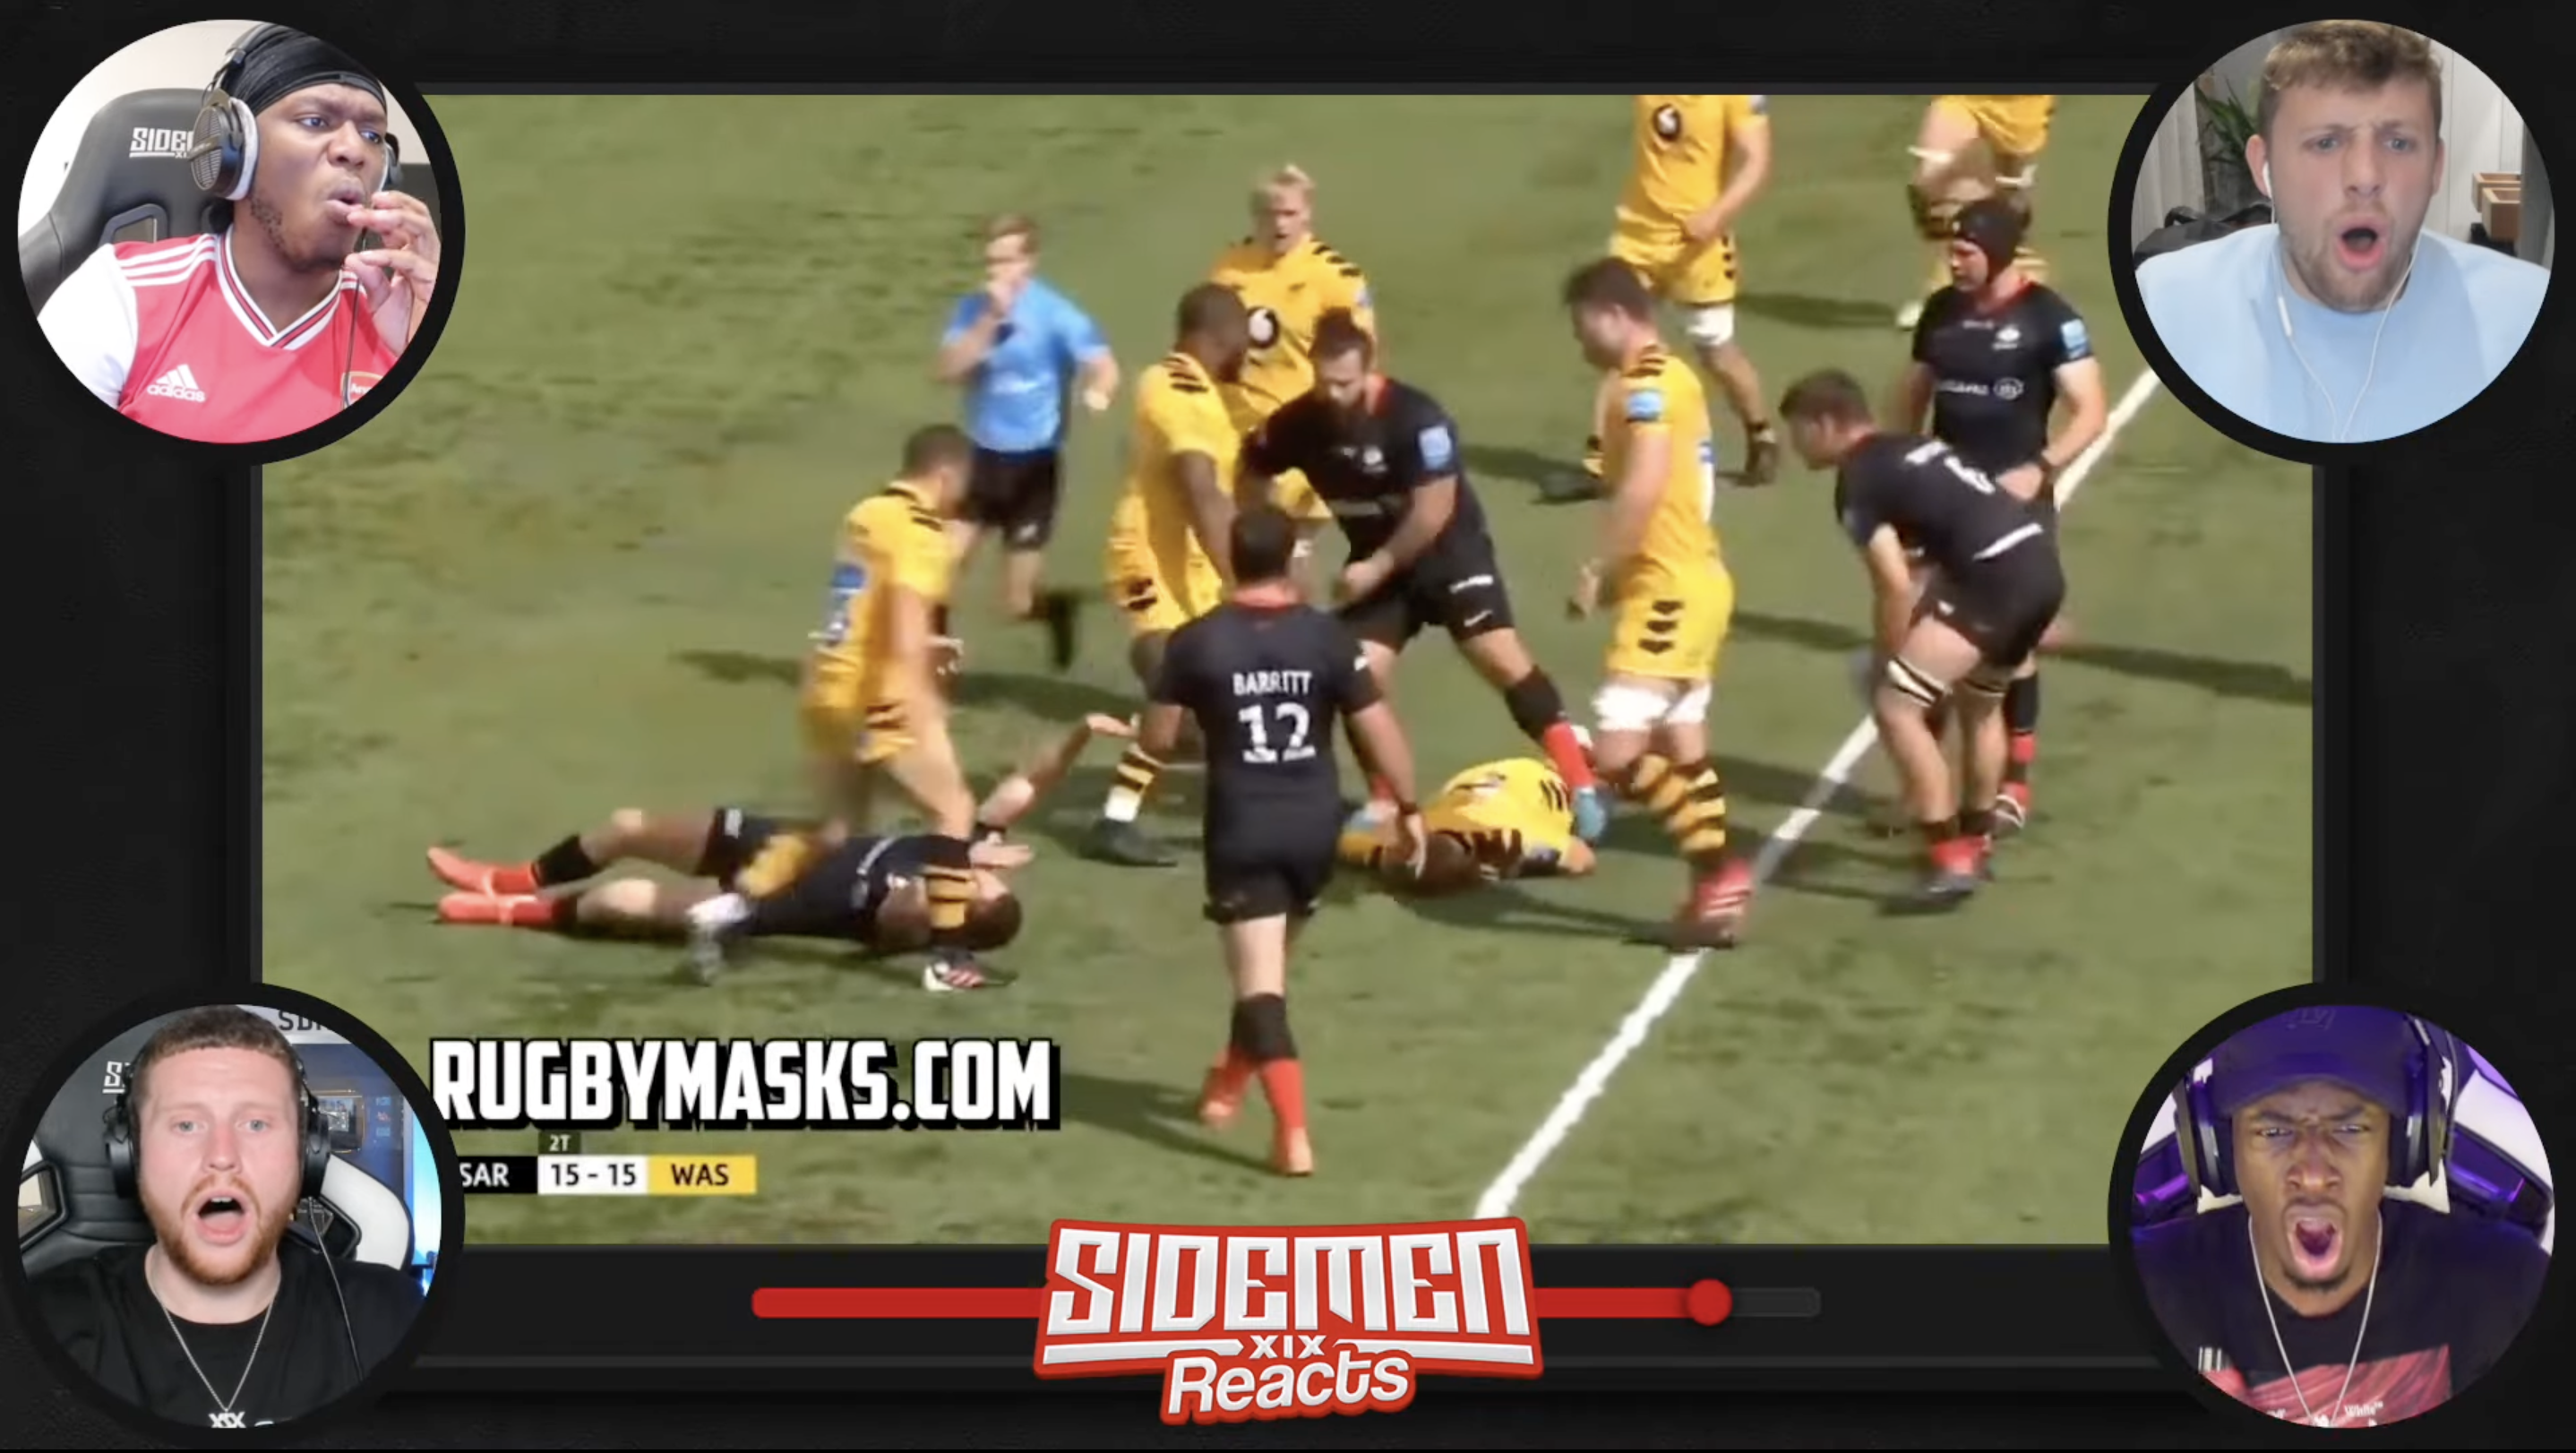 YouTube stars Sidemen react to rugby's biggest hits